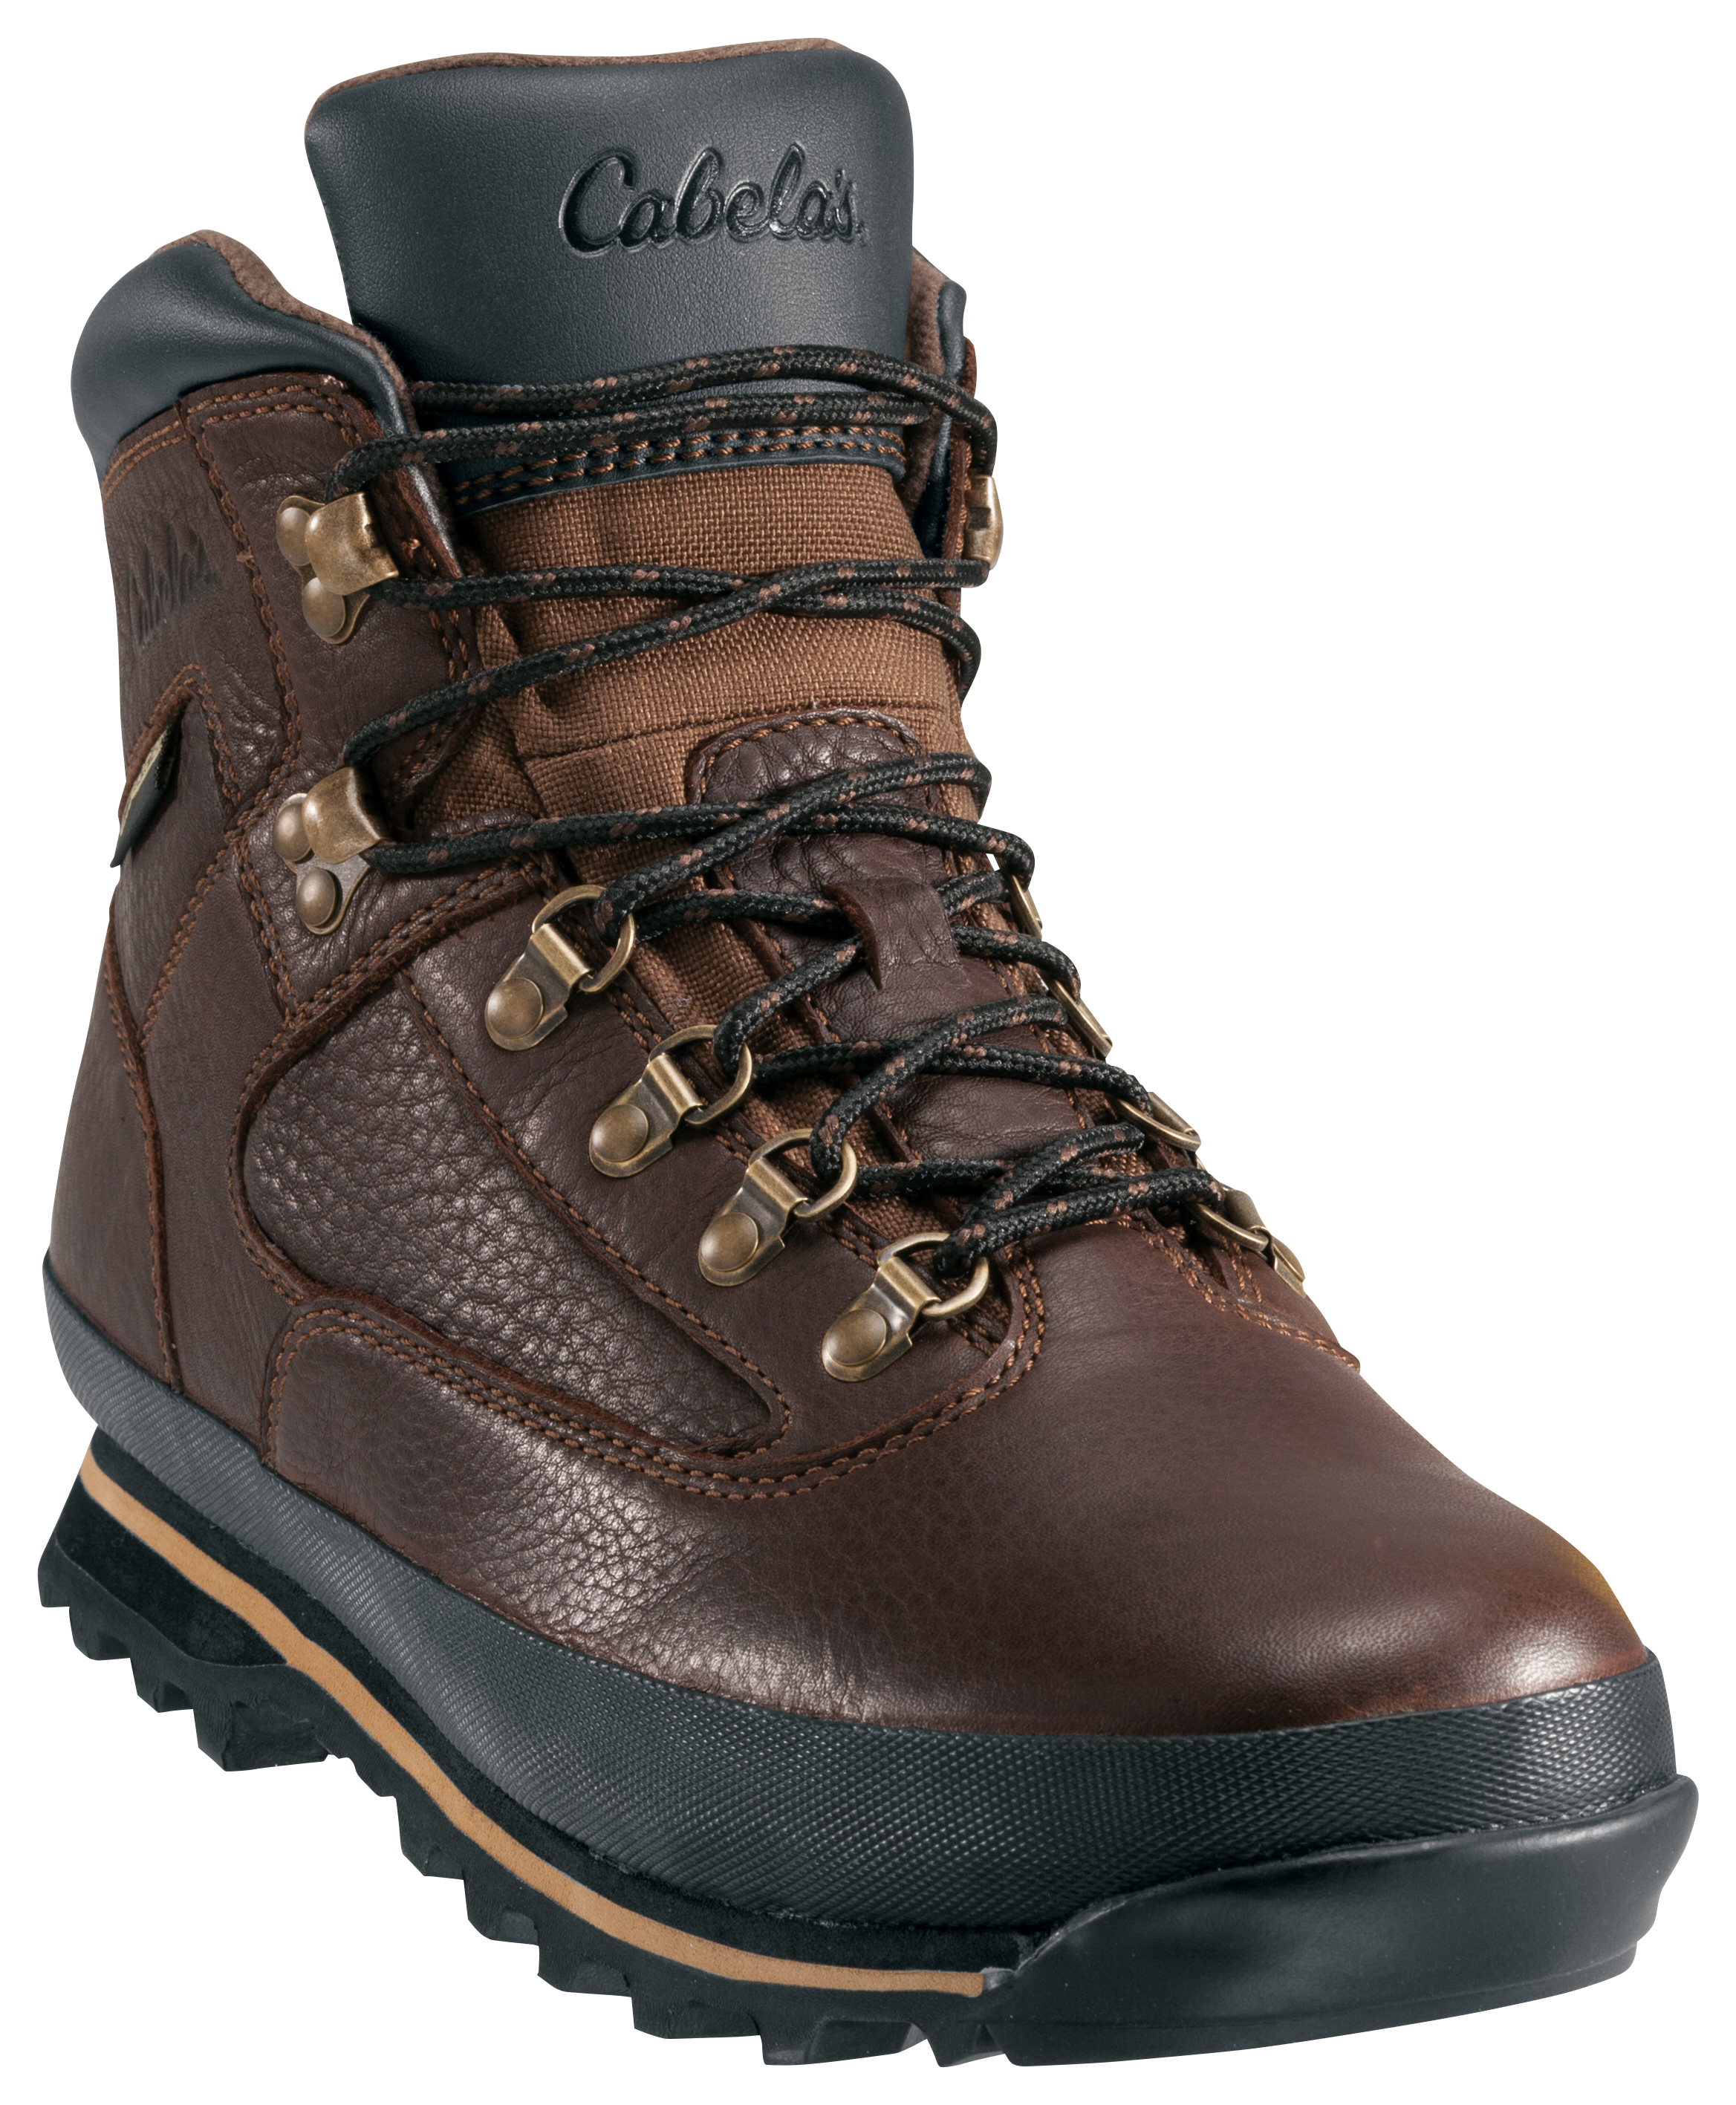 Cabela's Rimrock Mid GORE-TEX Hiking Boots for Men - Brown - 12M